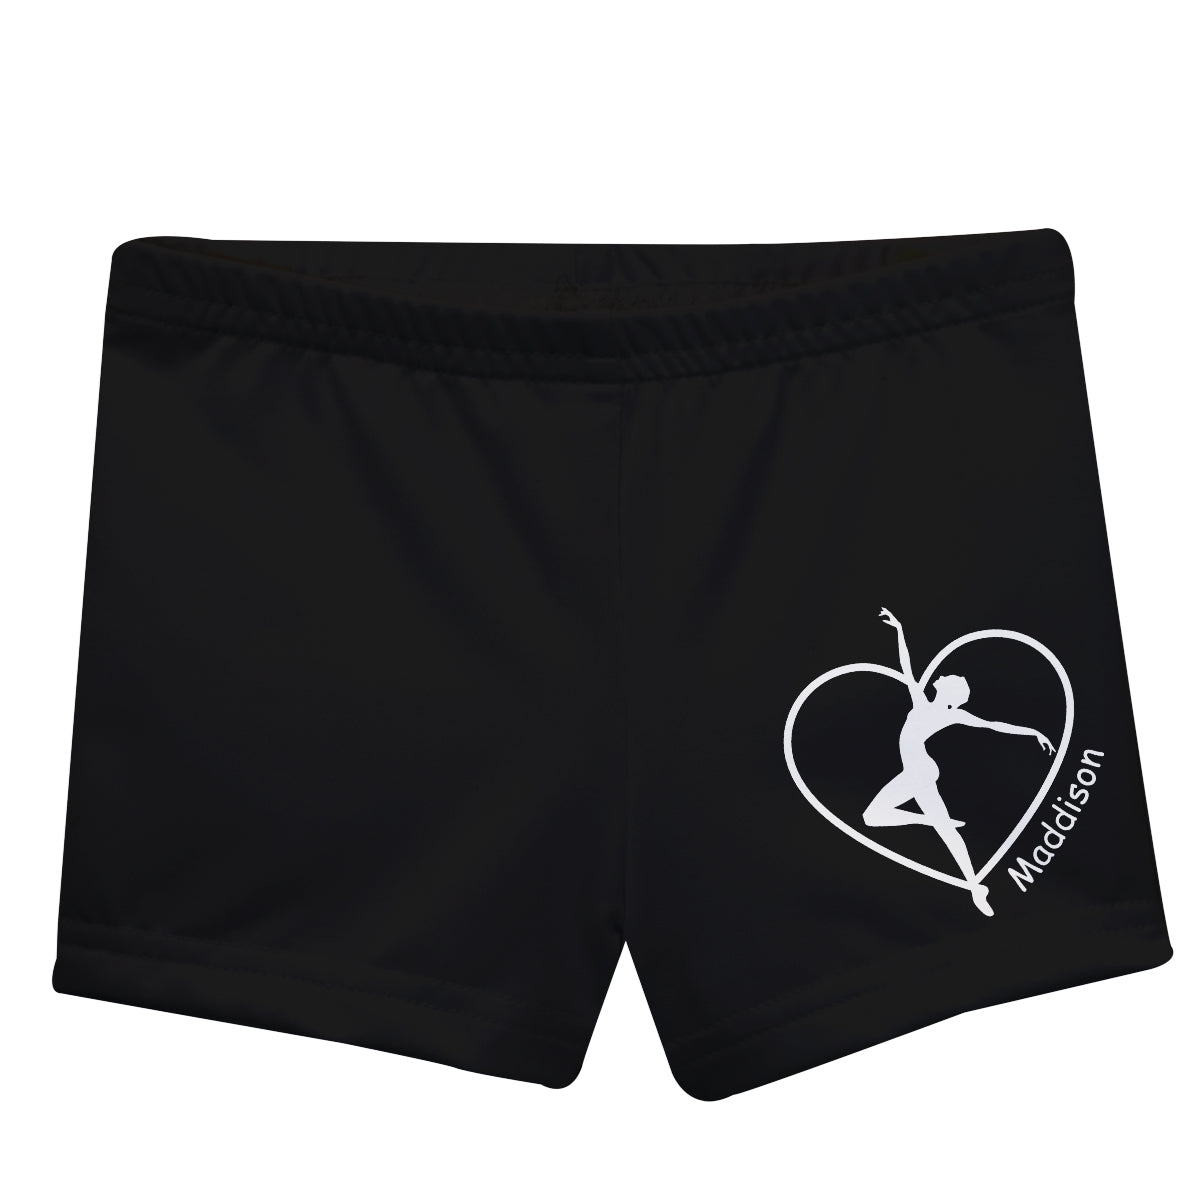 Black and white gymnast shorts with name - Wimziy&Co.